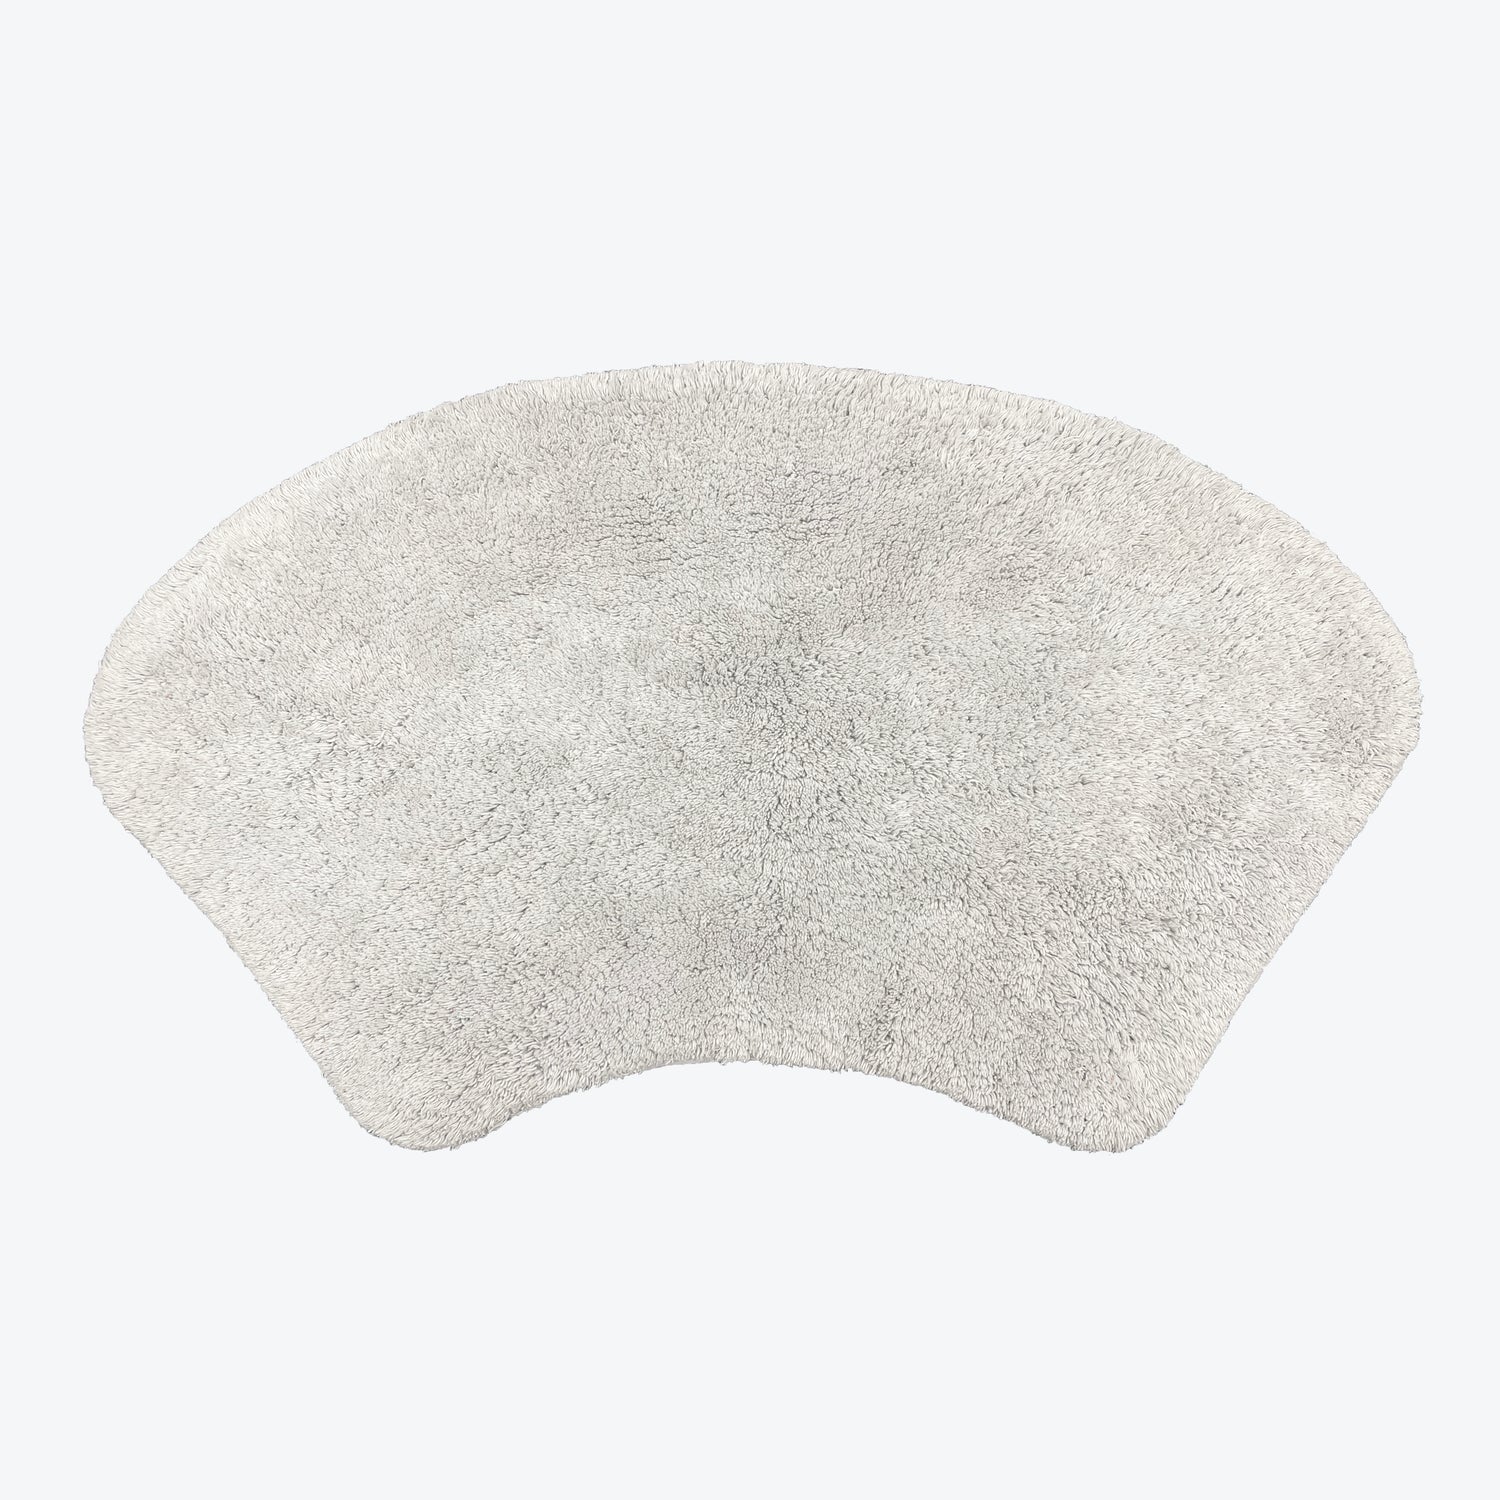 Dove grey curved shower mat 100% cotton.